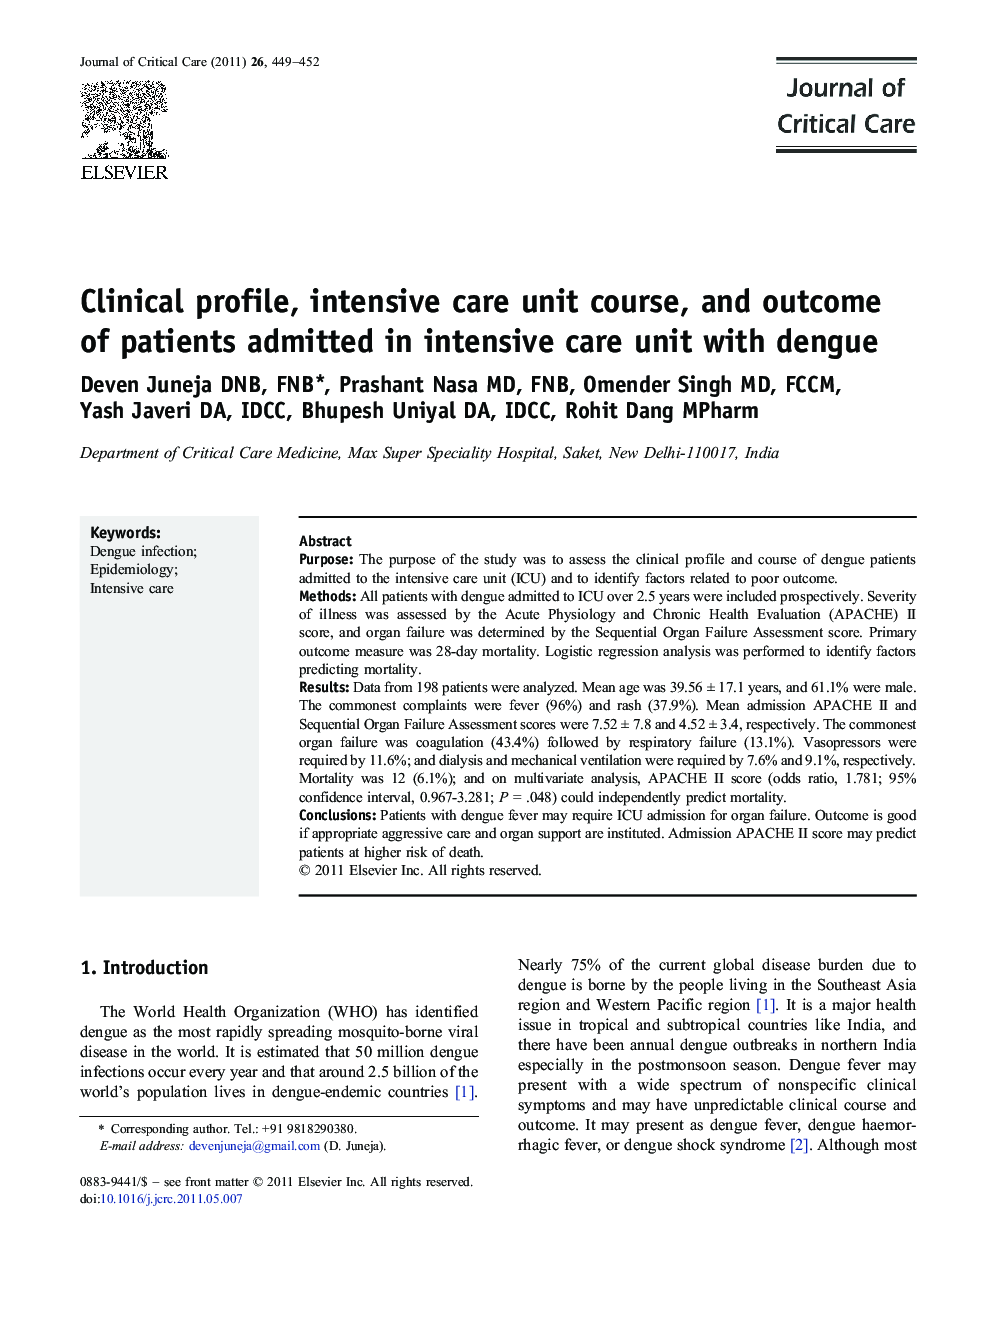 Clinical profile, intensive care unit course, and outcome of patients admitted in intensive care unit with dengue